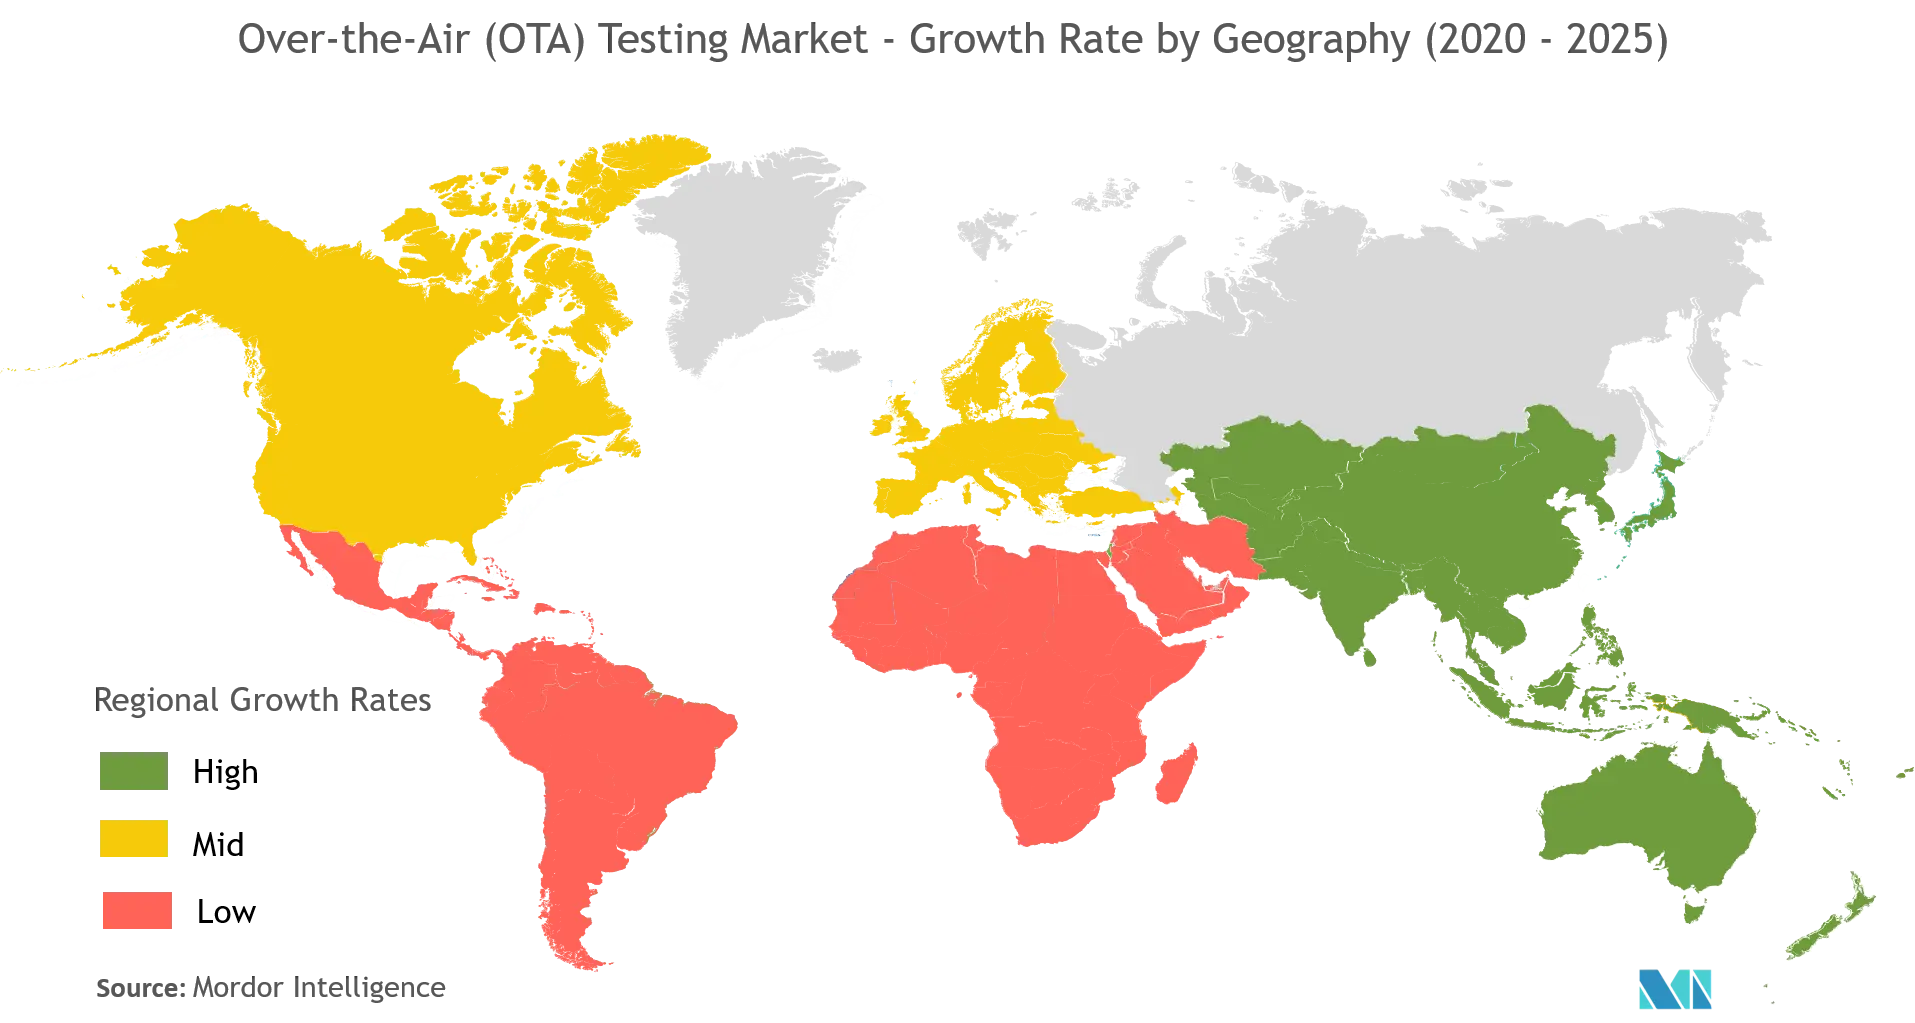 Over-the-Air (OTA) testing market growth